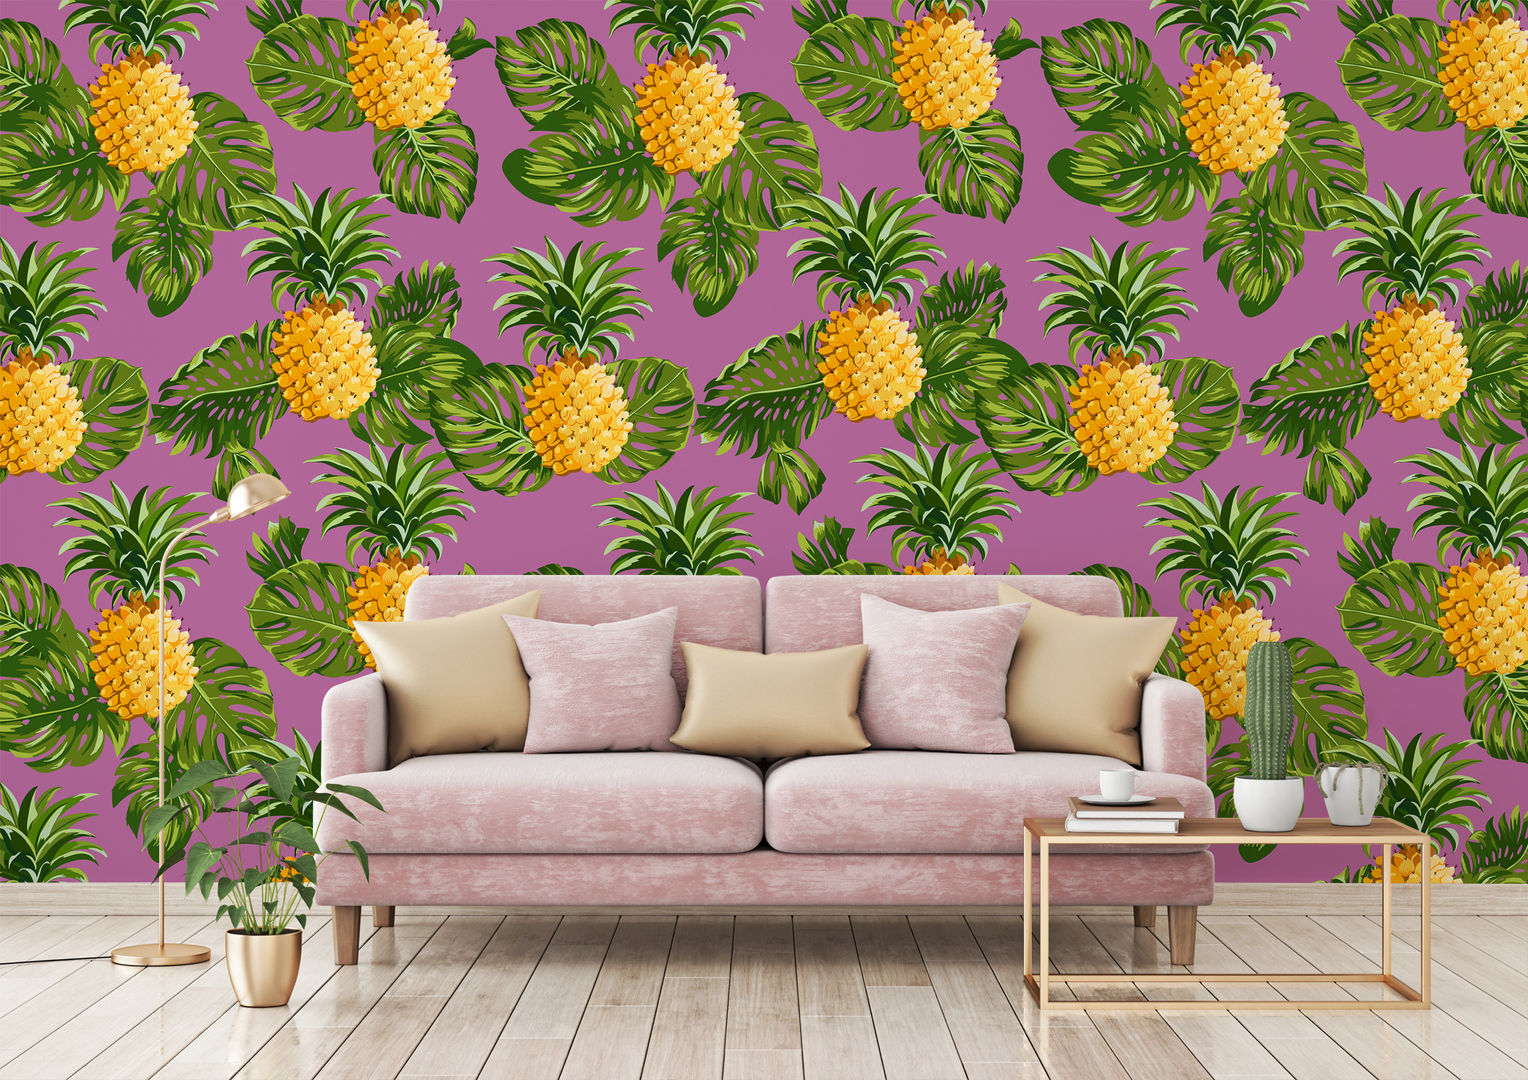 HYPNOTIC PINEAPPLES Pixers Tropical style living room Pixers,pink,pineapple,wallmural,wallpaper,tropical